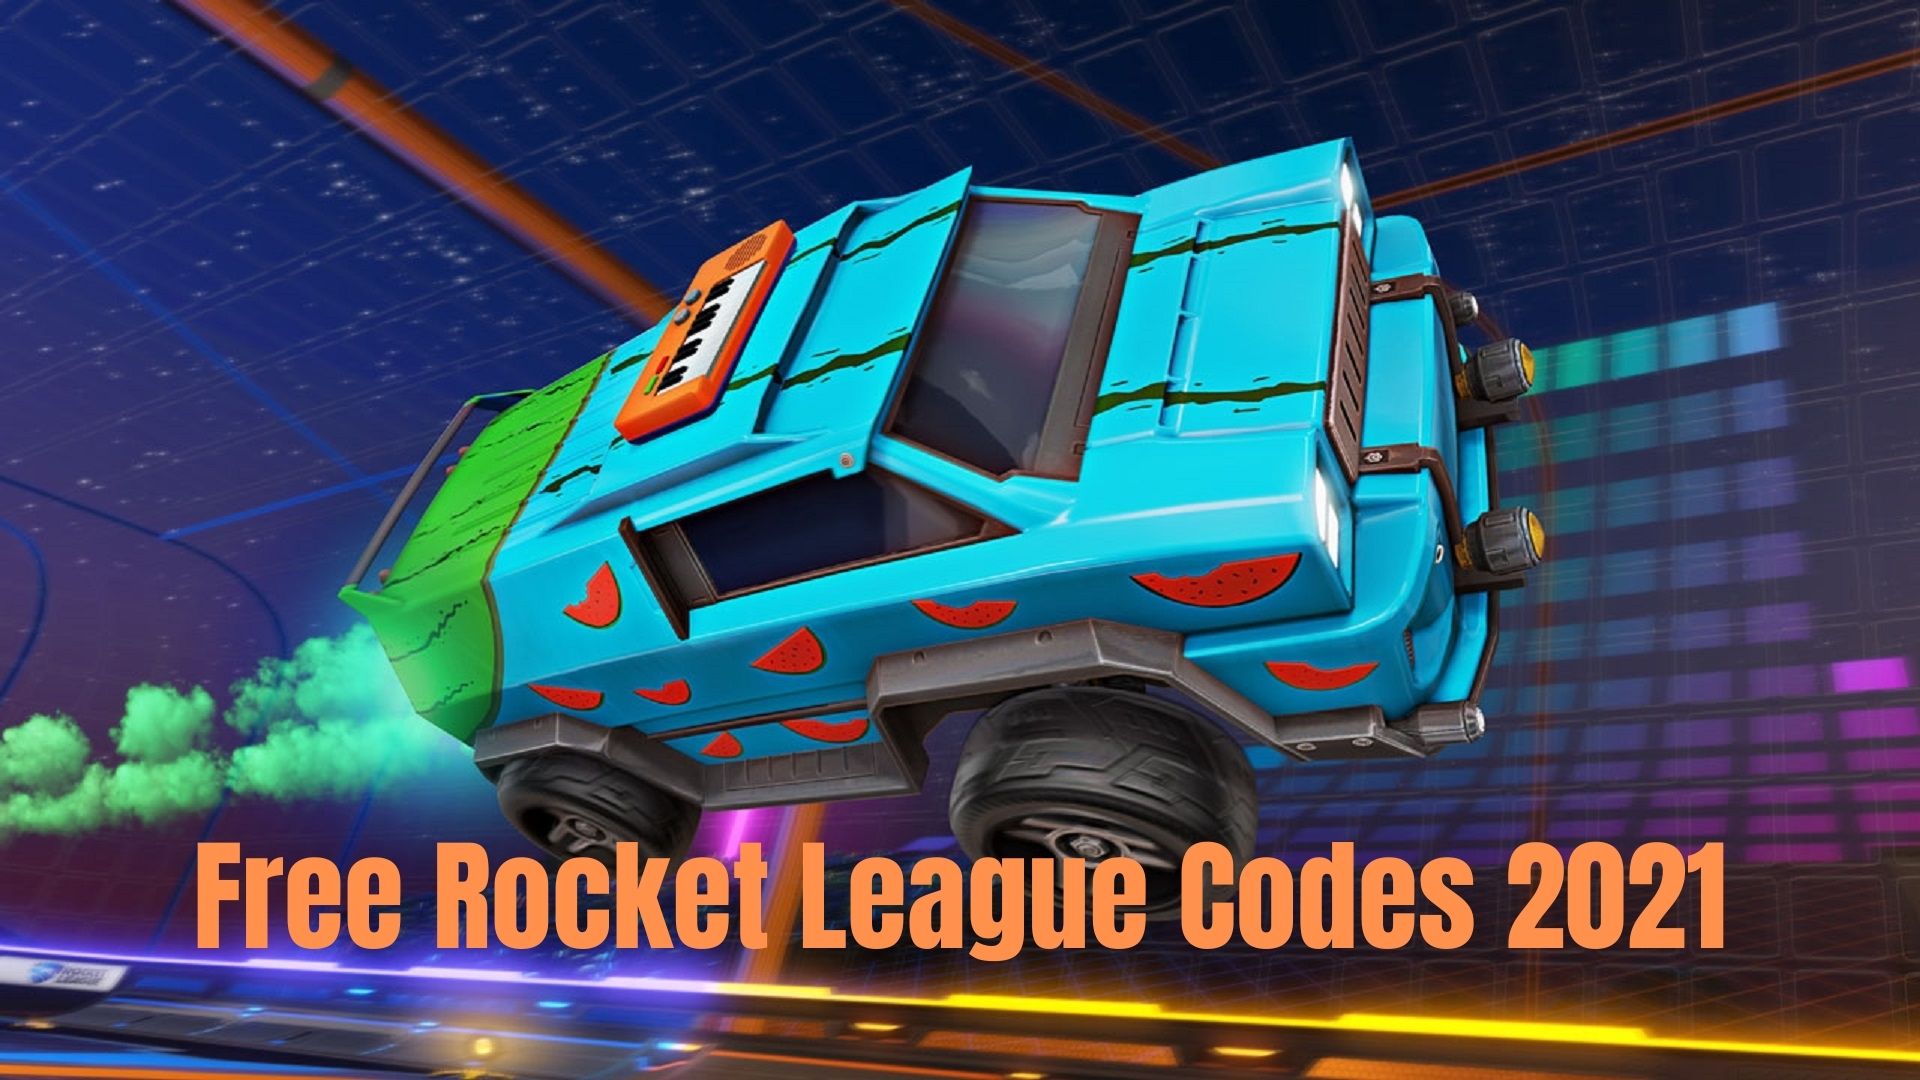 Rocket League Codes Free Cosmetics And More In July 2021 - roblox rocket league